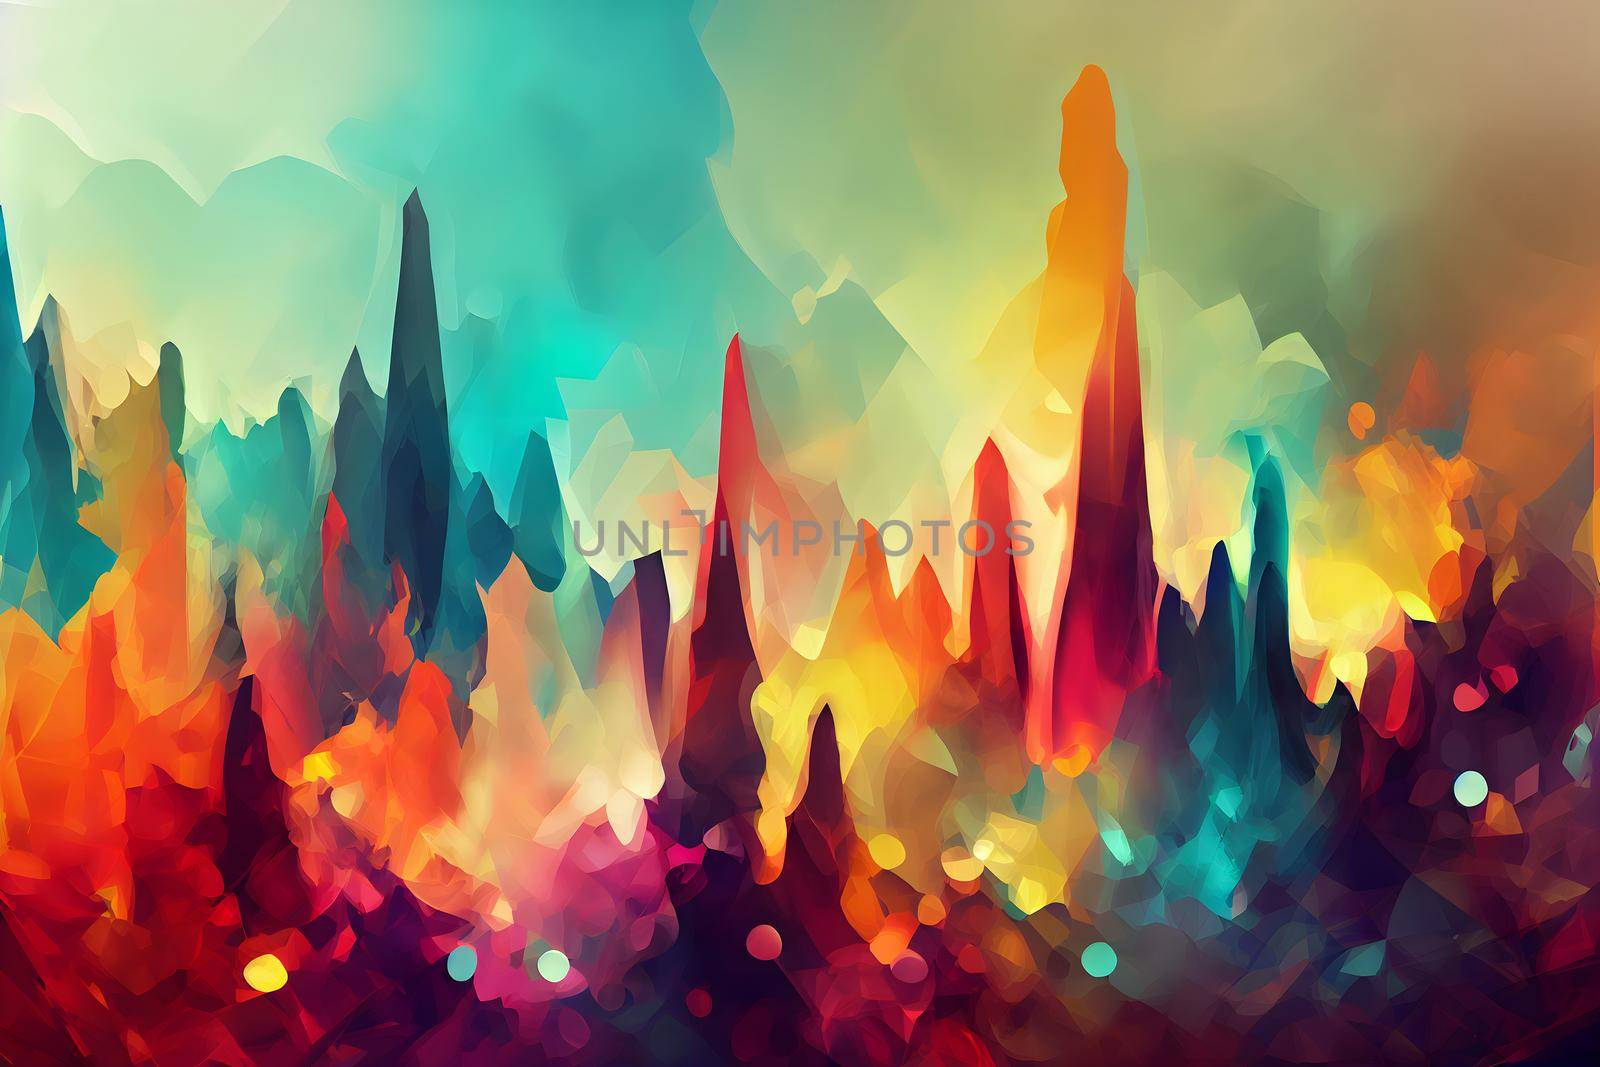 abstract flat background with colorful painted spikes, neural network generated art by z1b